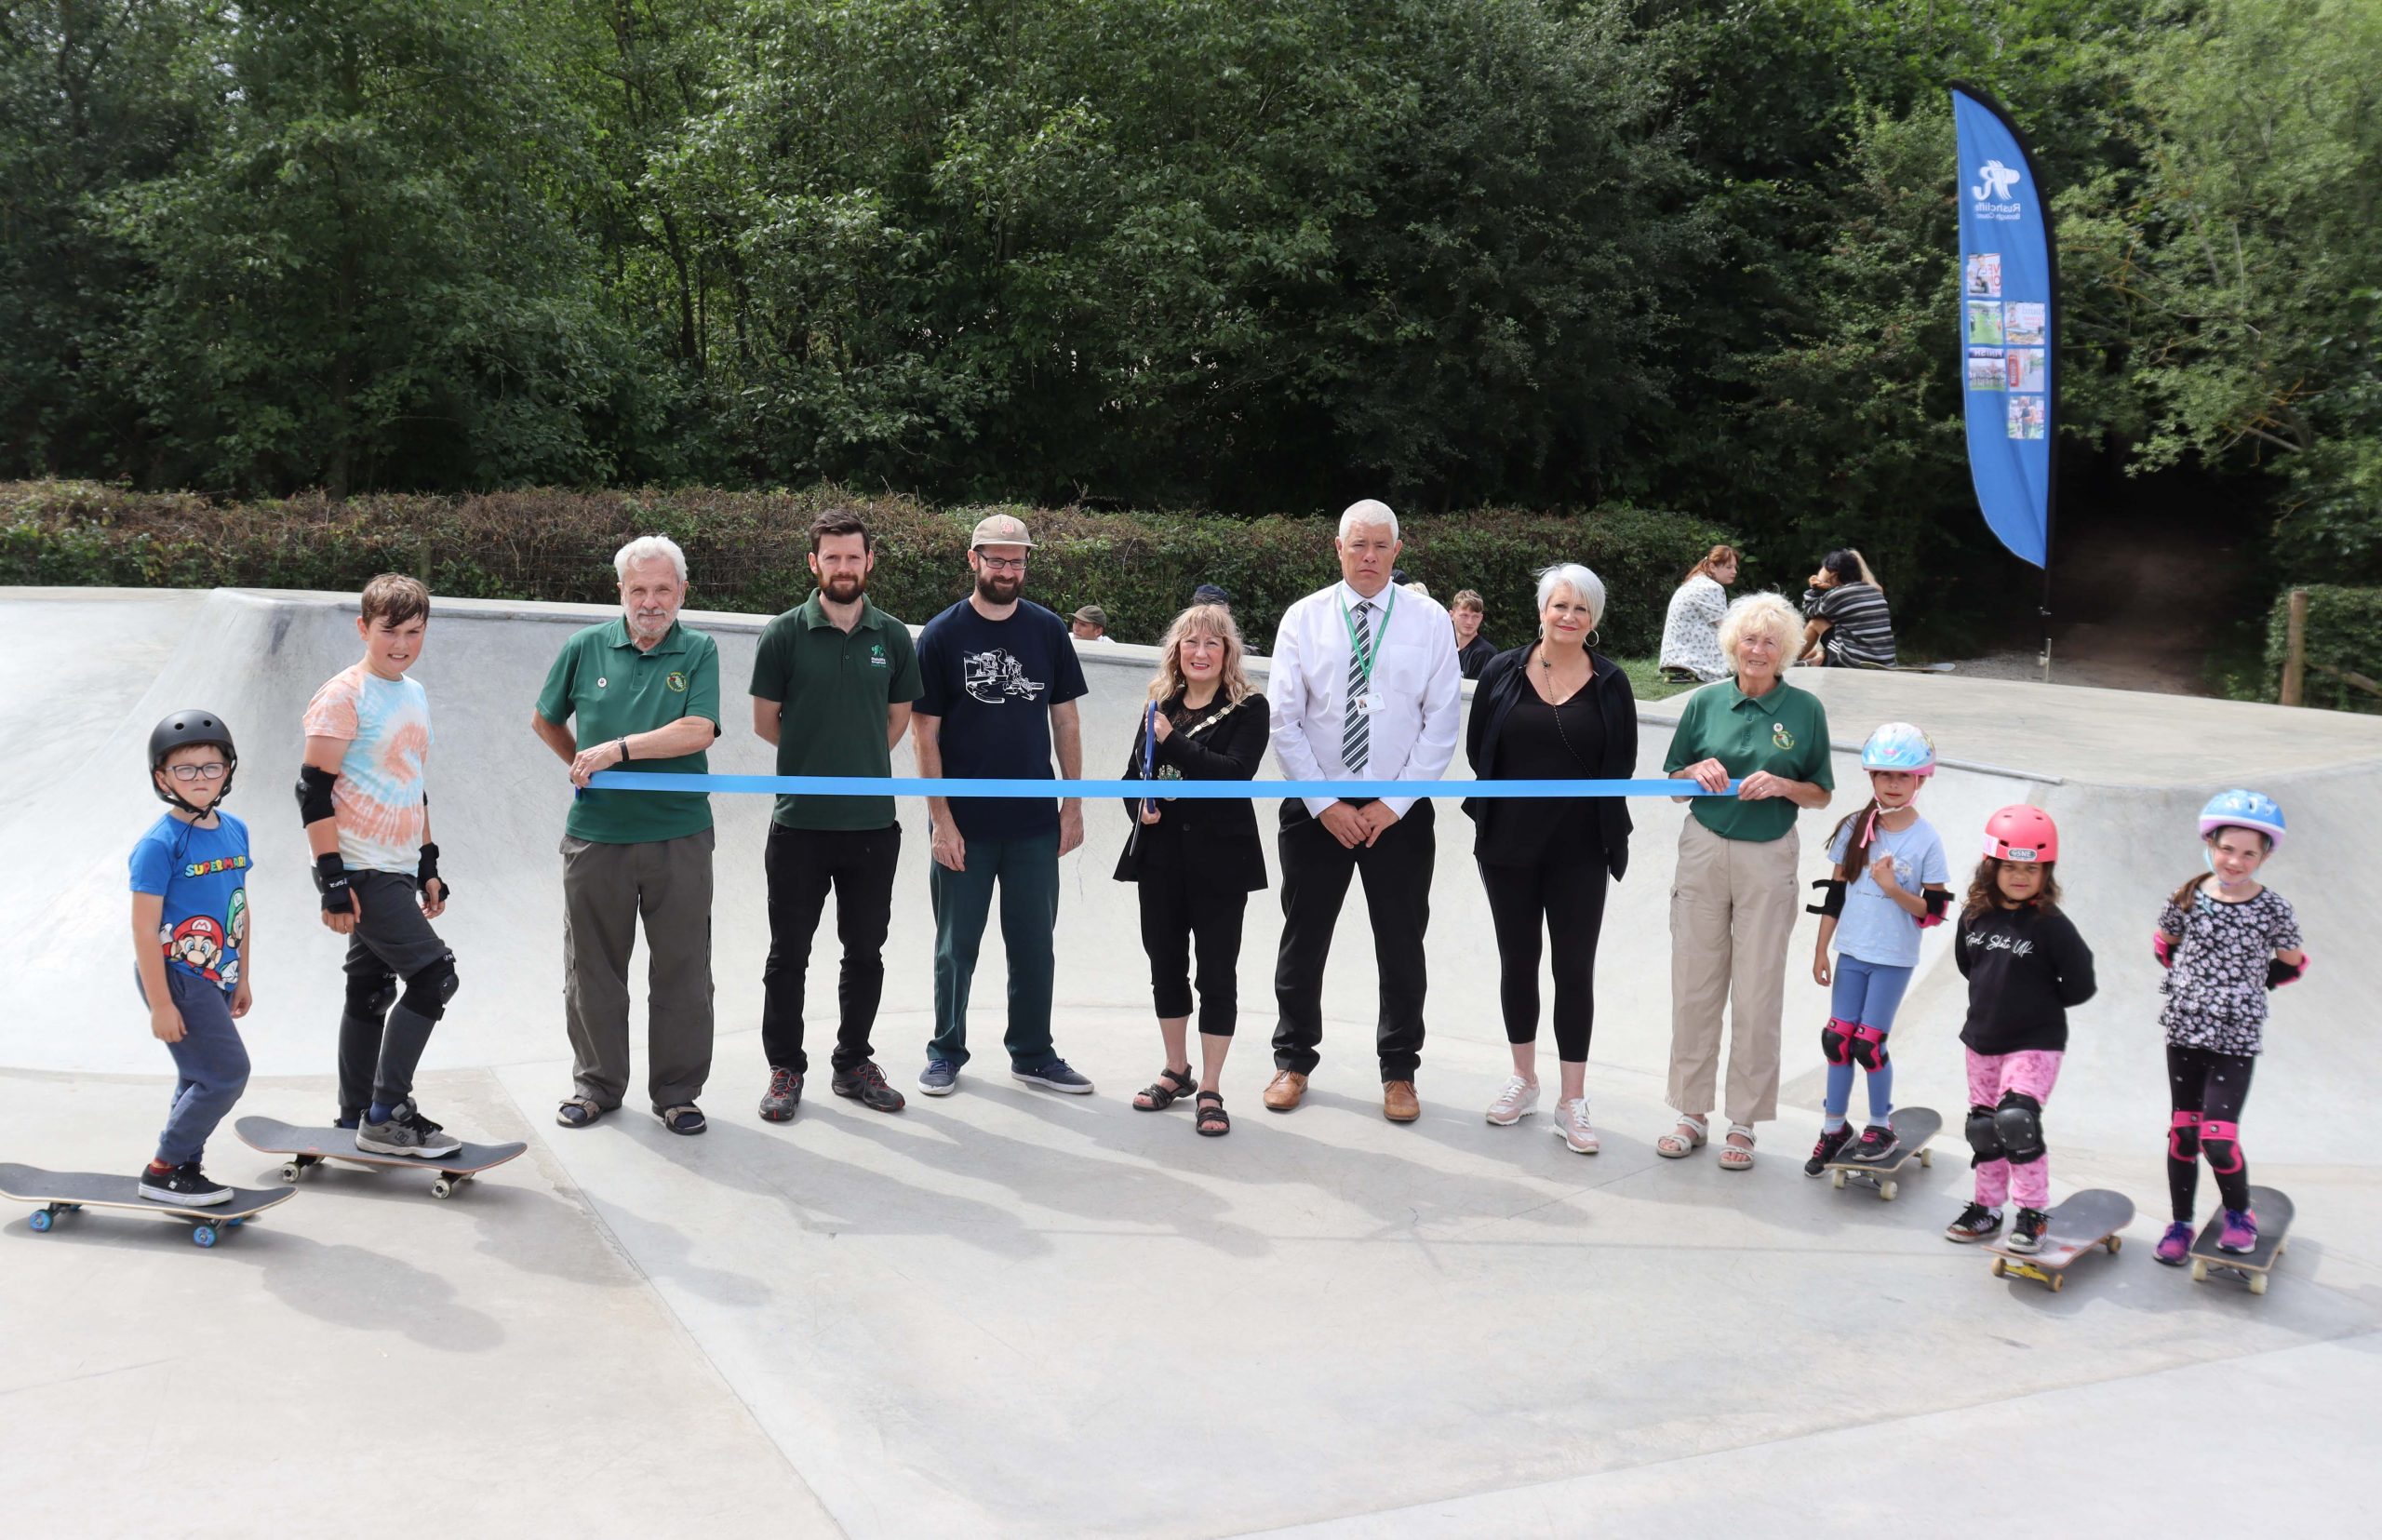 The Mayor of Rushcliffe Cllr Sue Mallender cut the ribbon to officially open the skate park scaled